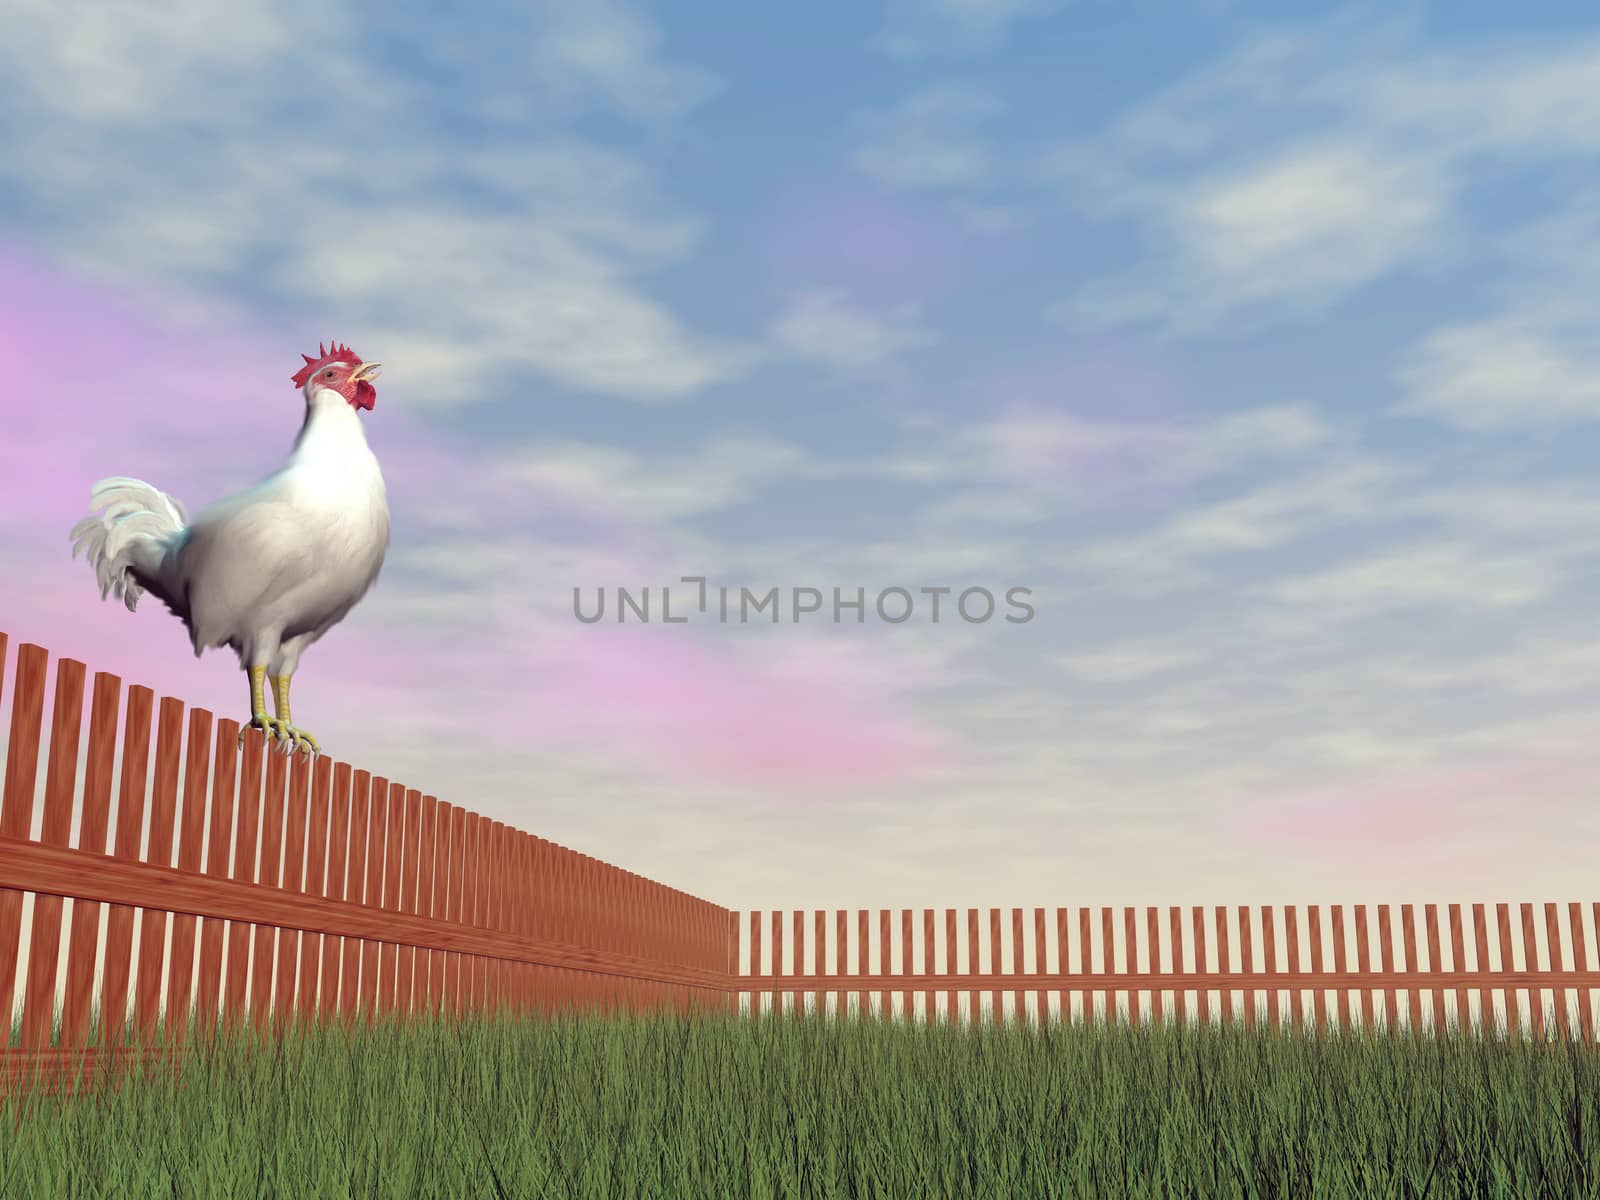 One rooster alone standing on a wood fence while crowing in the morning light